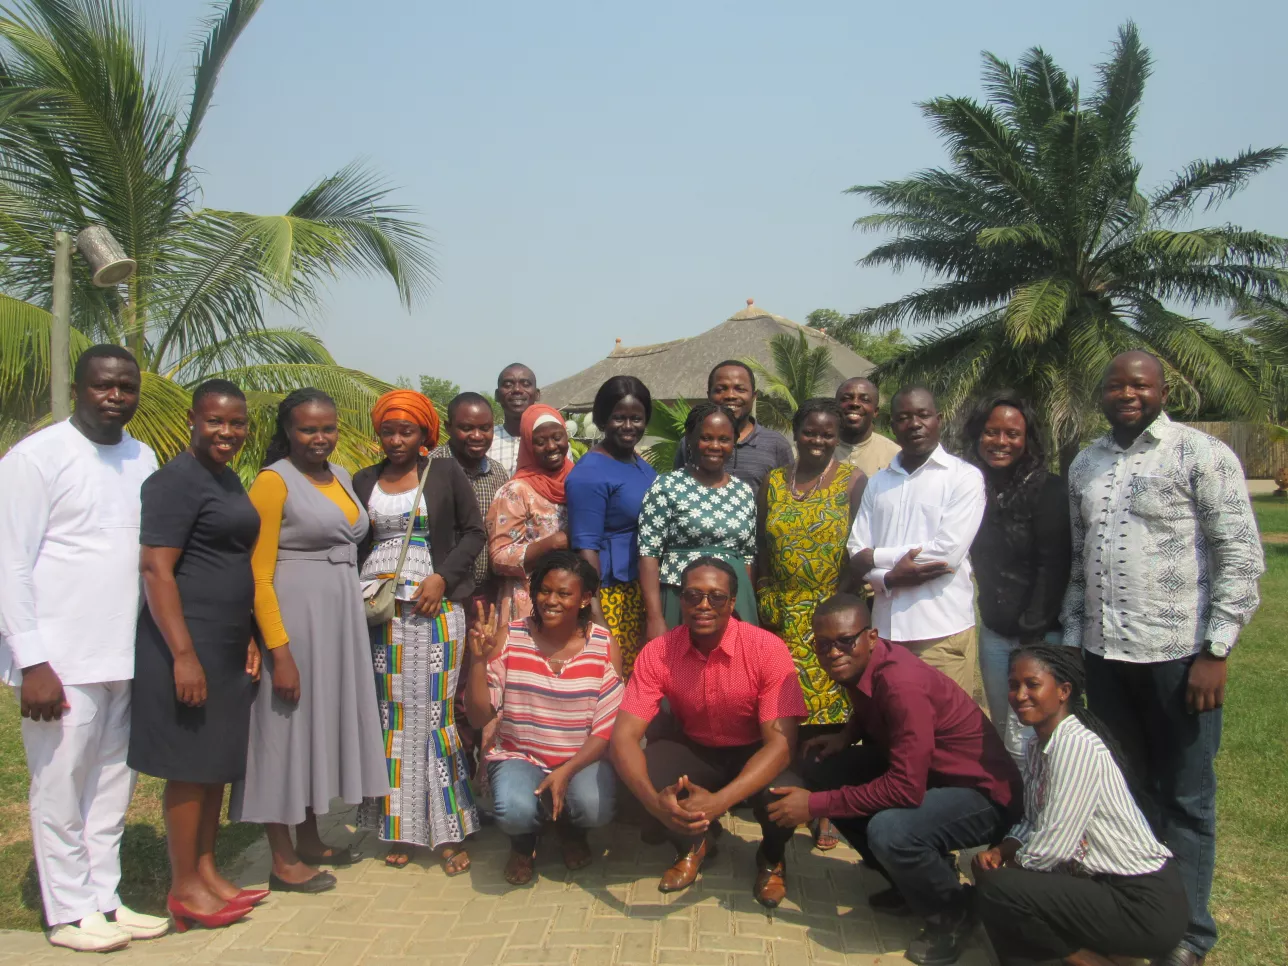 Group photo with the participants from the methodology course in Ghana. Photo